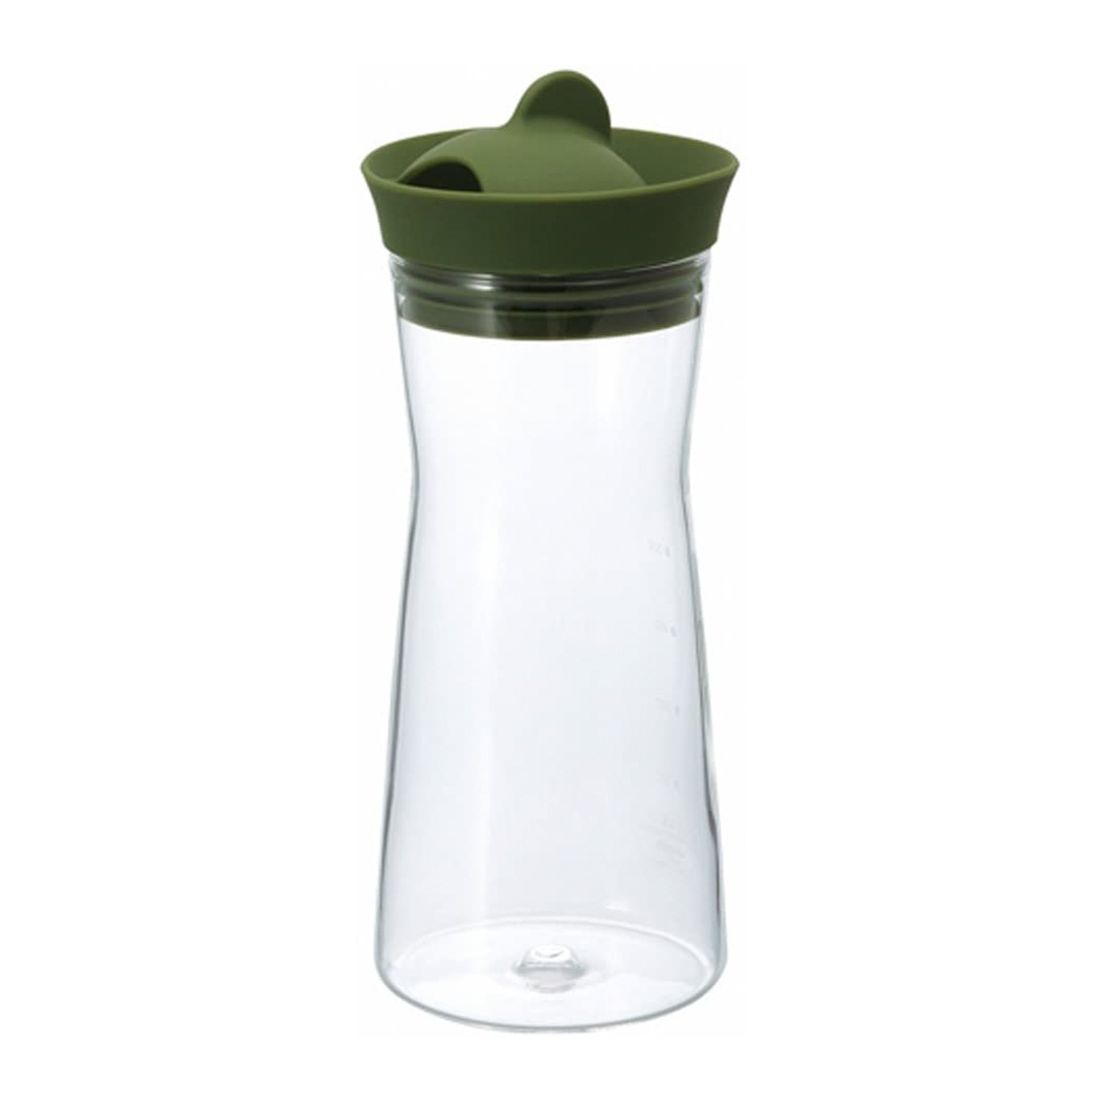 Hario Water Pitcher Olive Green 700ml